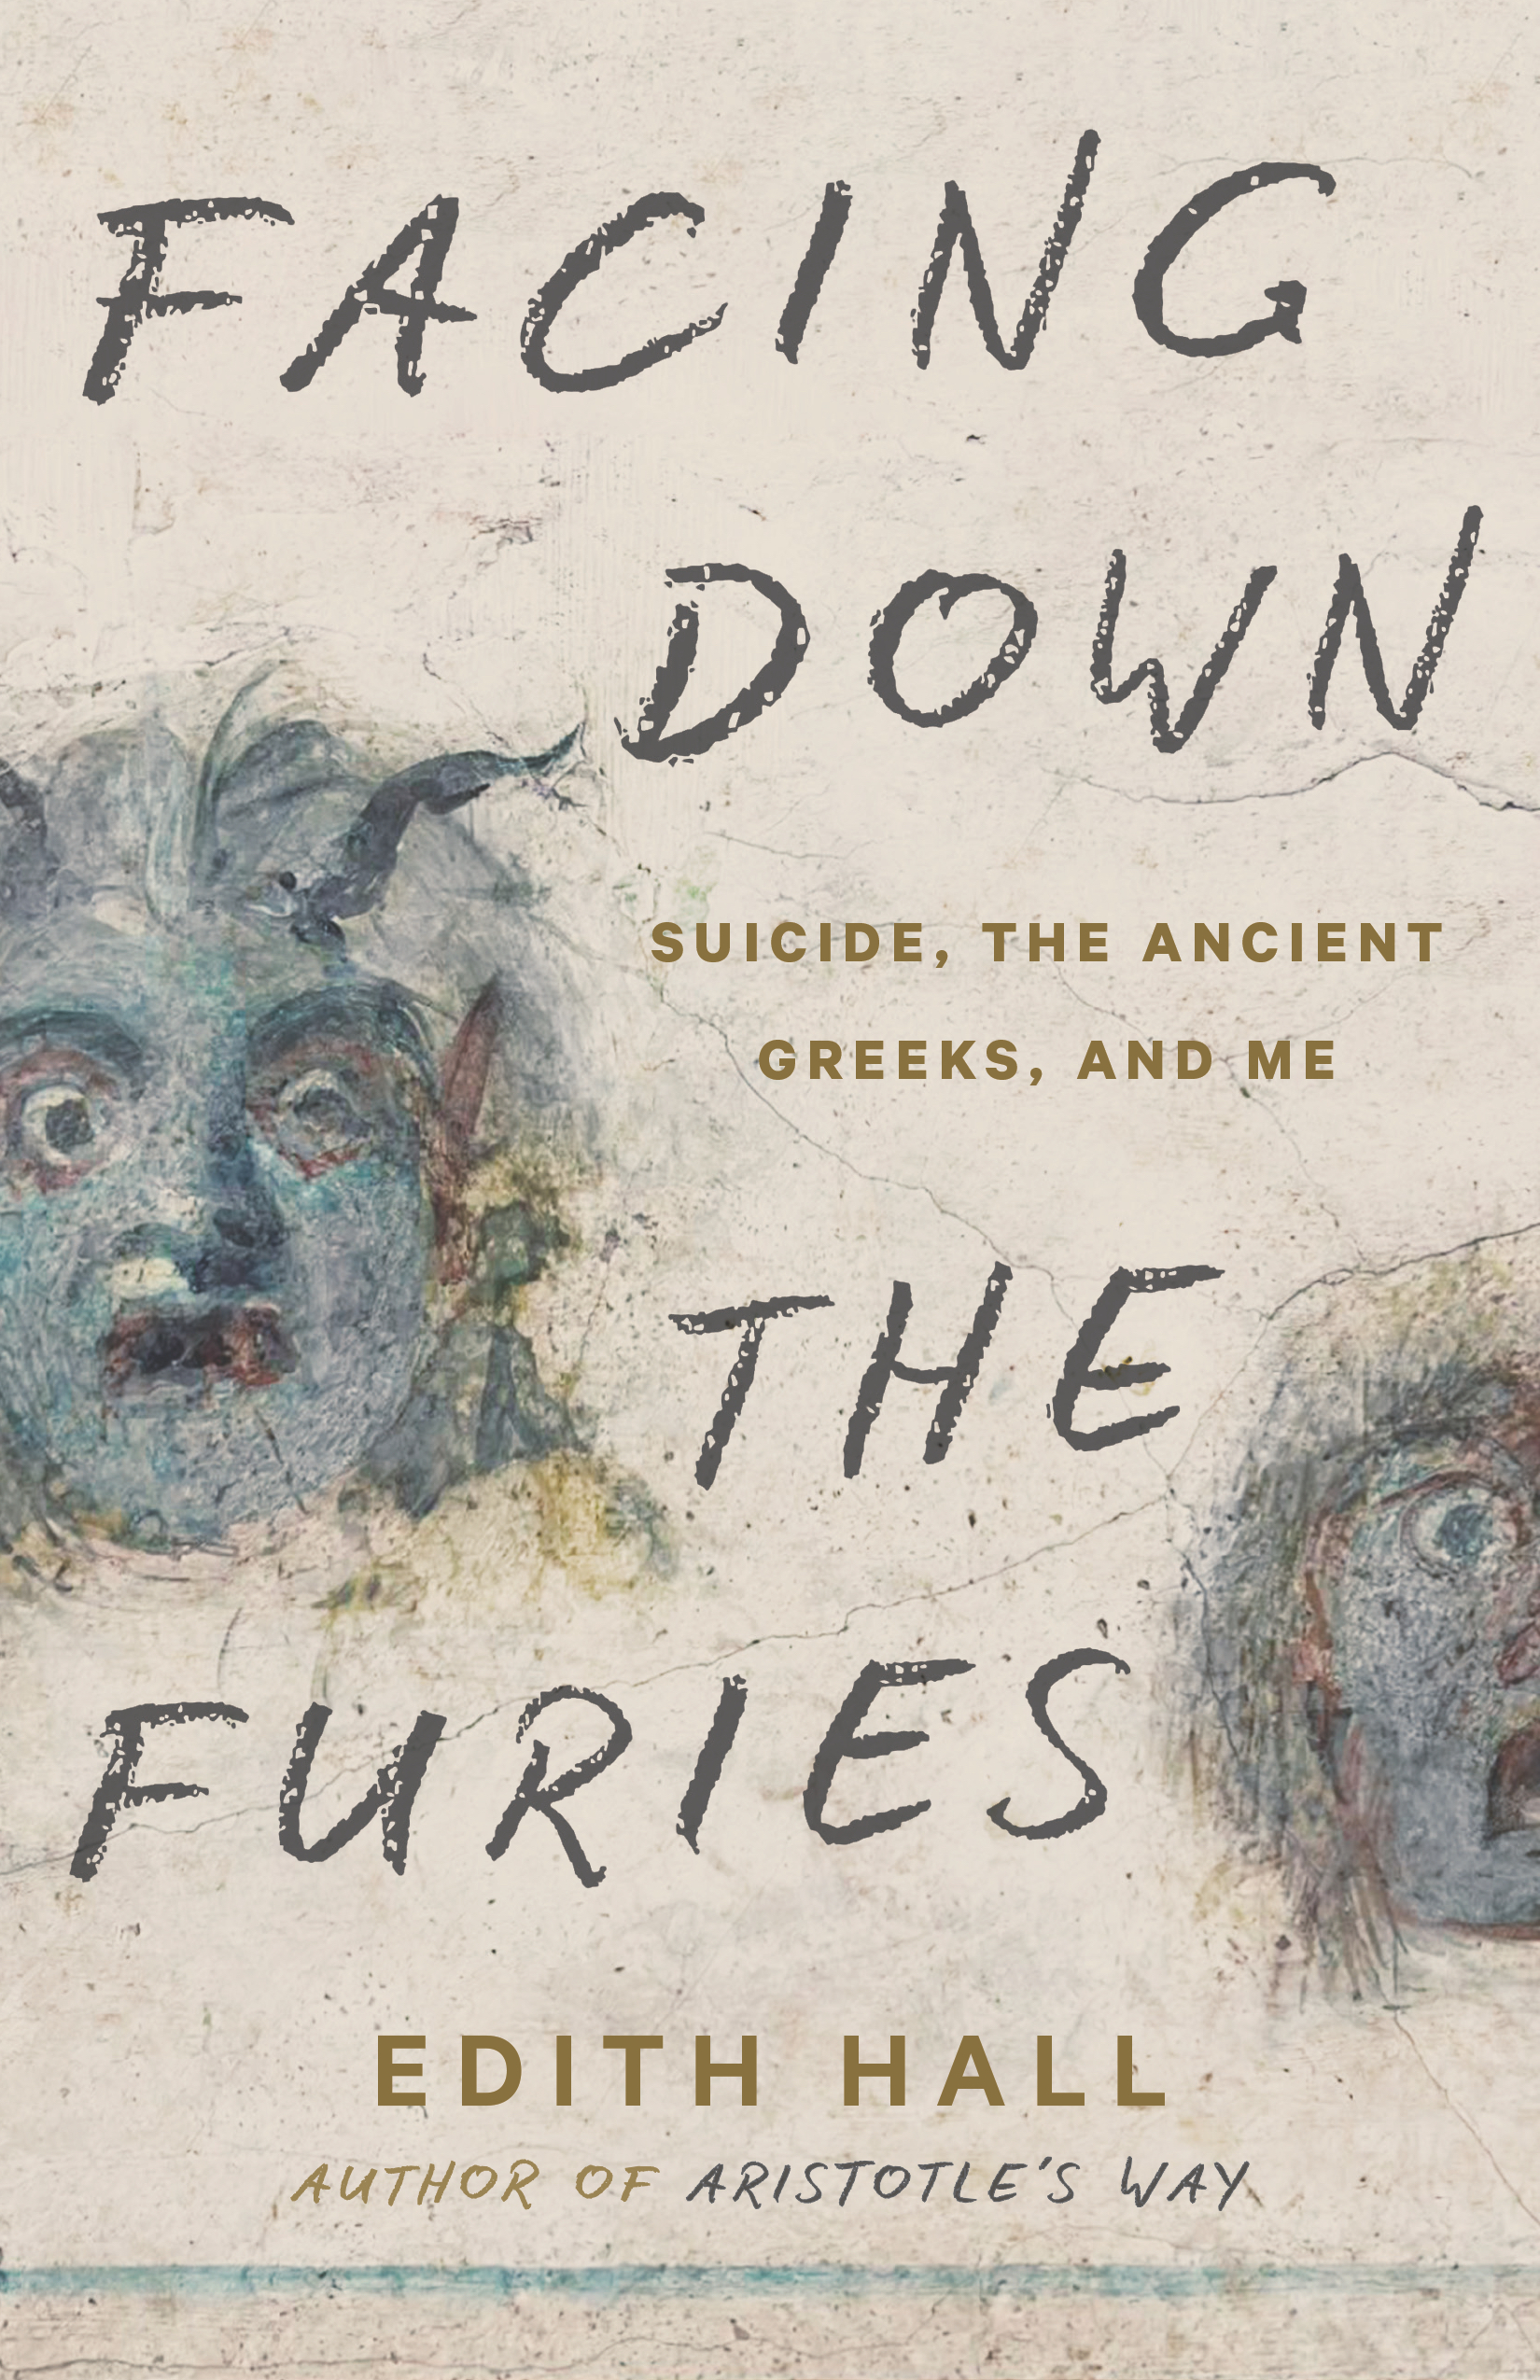 FACING DOWN THE FURIES: SUICIDE, THE ANCIENT GREEKS, AND ME